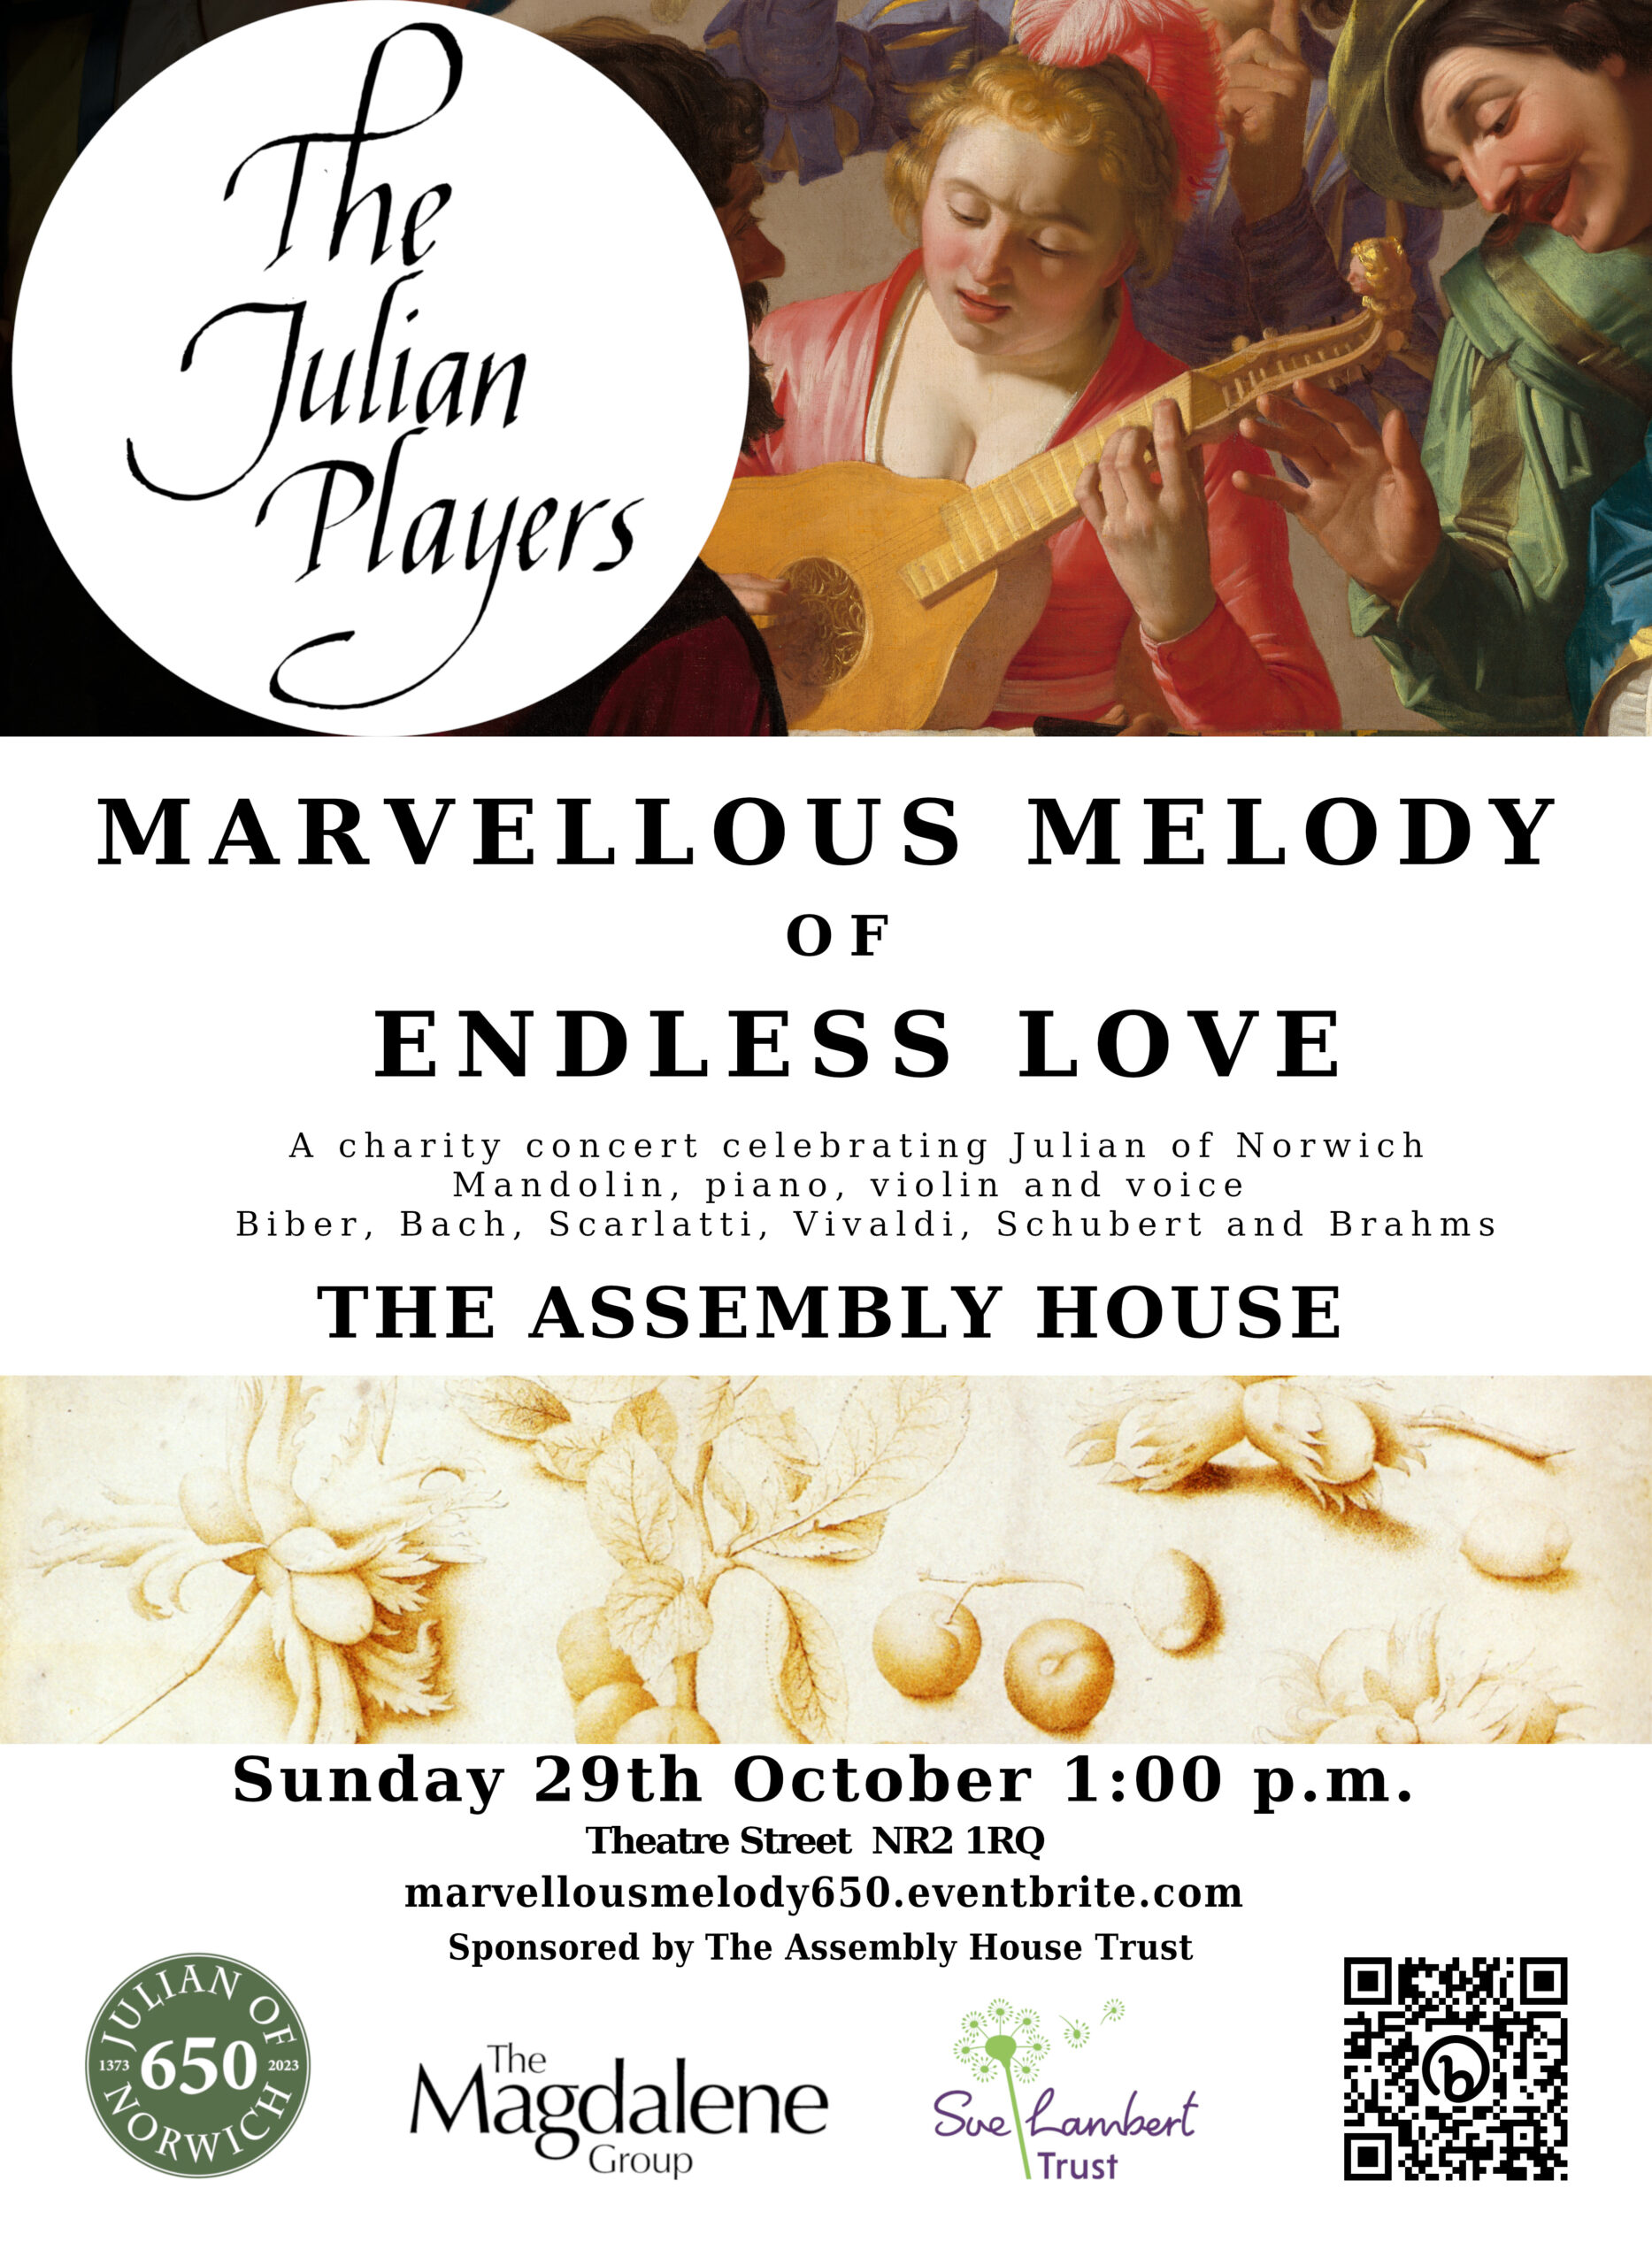 The Julian Players at The Assembly House